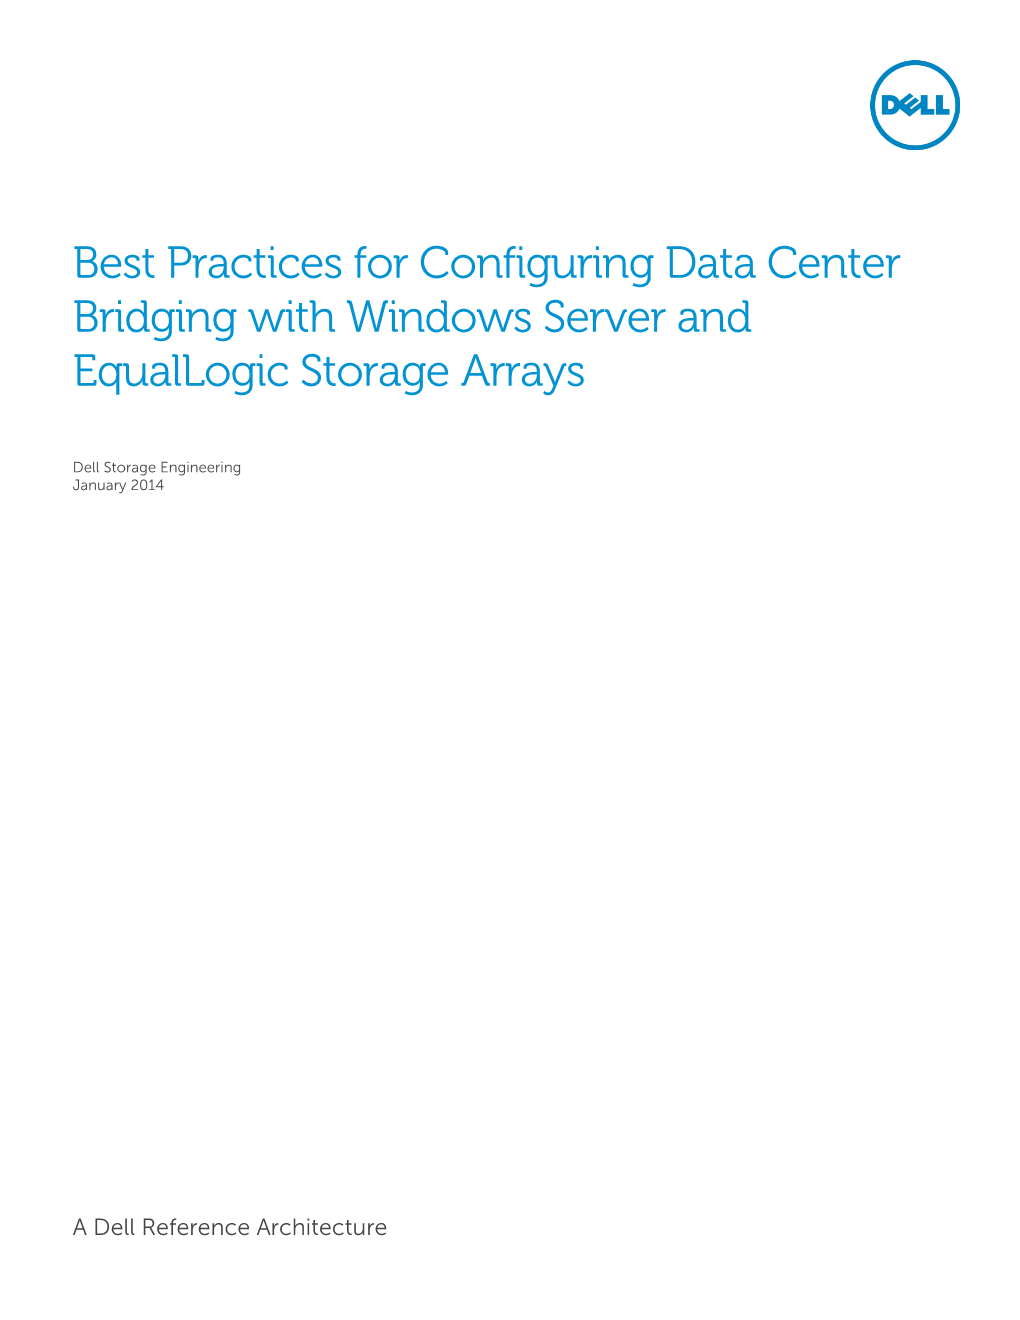 Best Practices for Configuring Data Center Bridging with Windows Server and Equallogic Storage Arrays